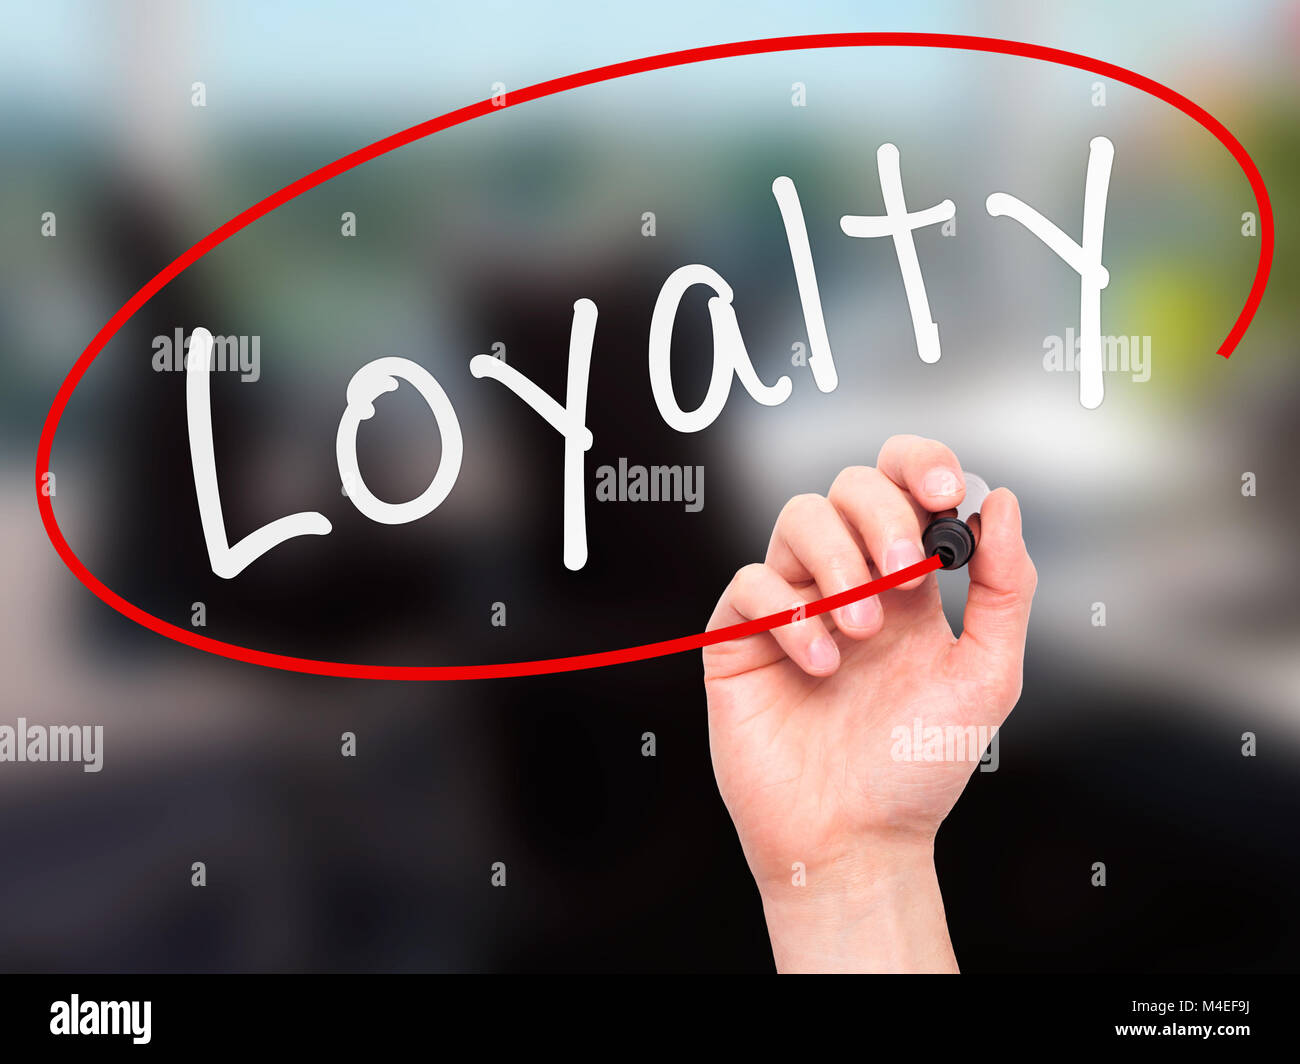 Man Hand writing Loyalty with marker on transparent wipe board Stock Photo